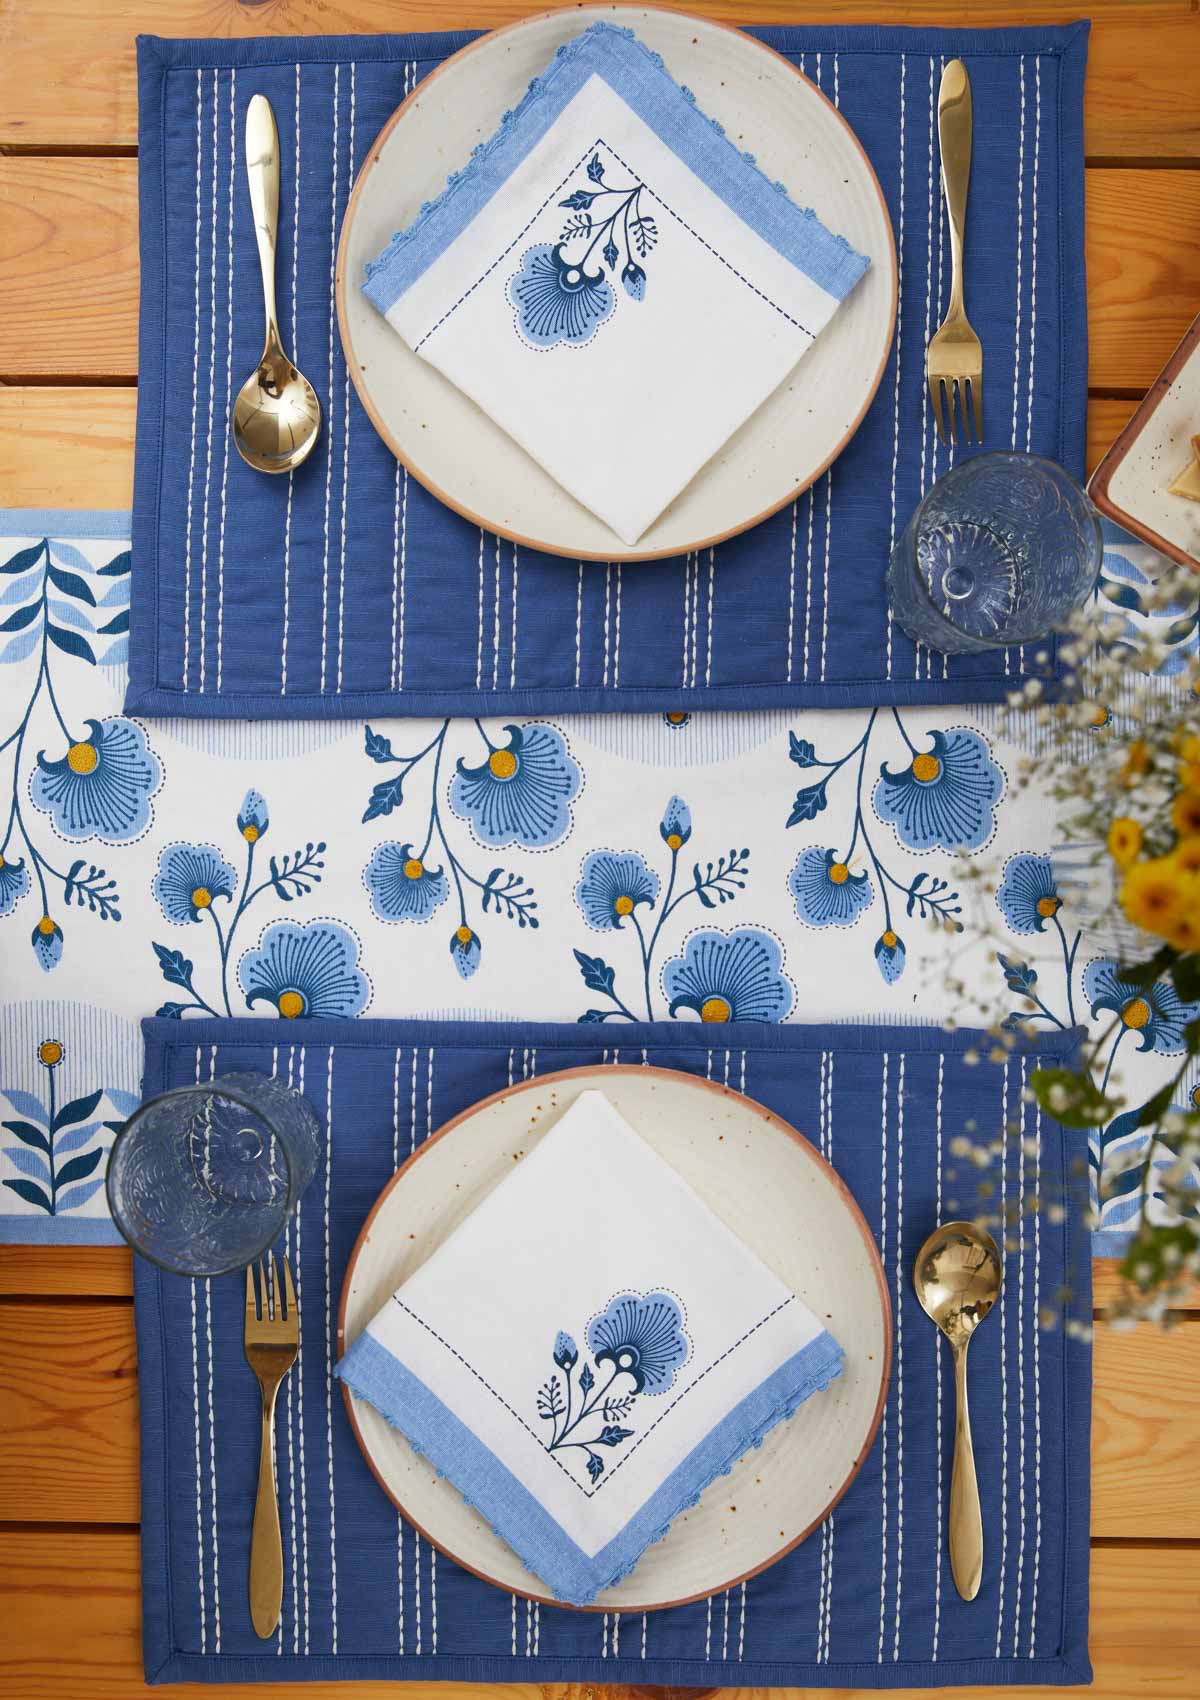 Coromandel 100% cotton ethnic table runner for 4 seater or 6 seater Dining with tassels - Powder blue